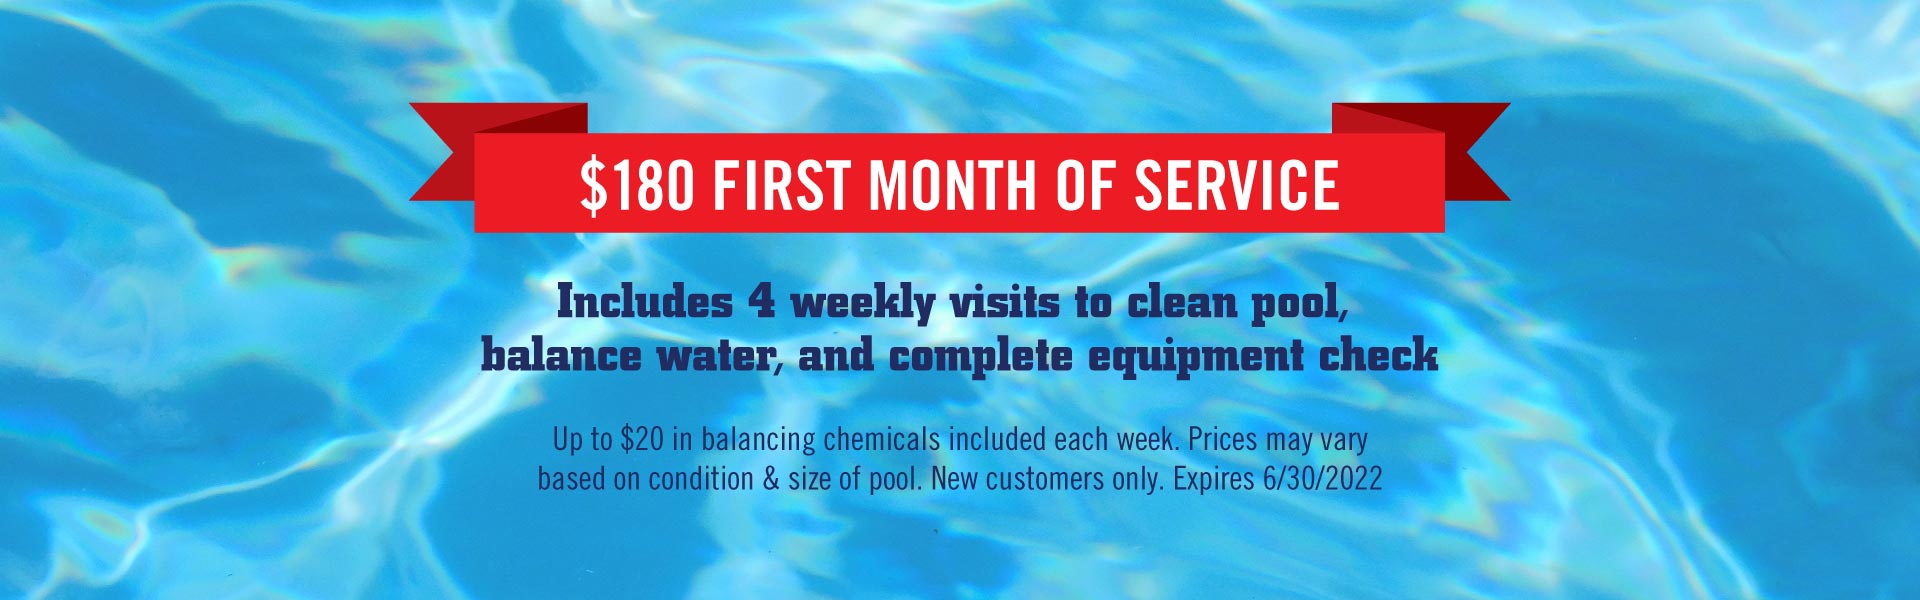 Promotion for $180 first month of pool cleaning service